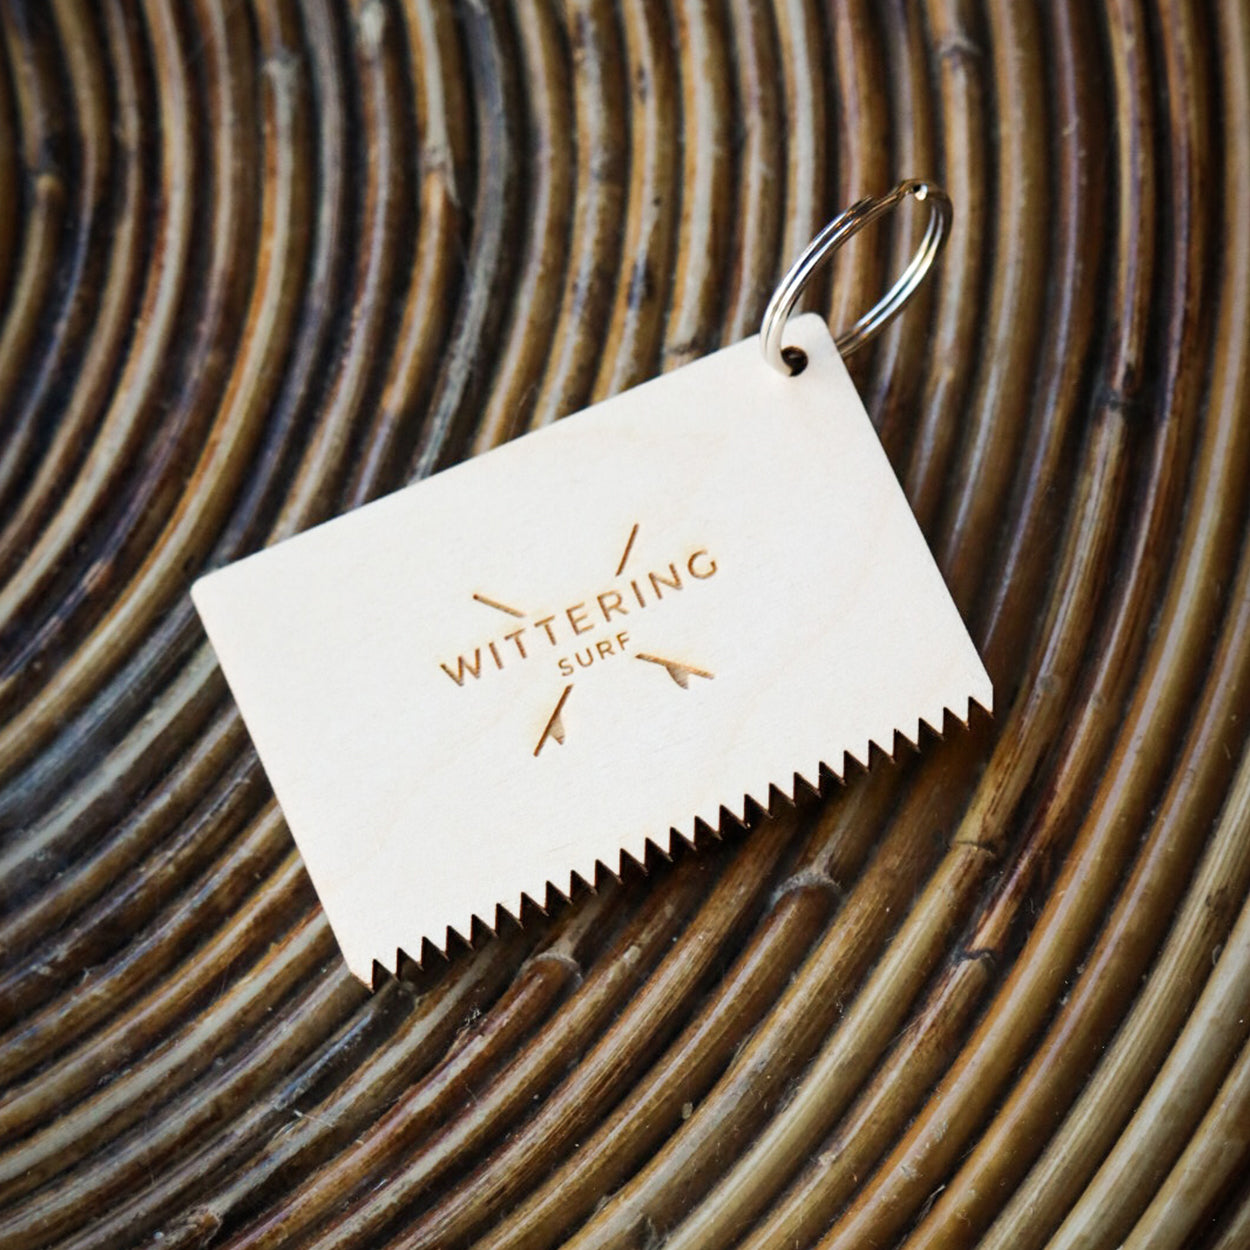 WITTERING SURF WOODEN WAX COMB - Wittering Surf Shop